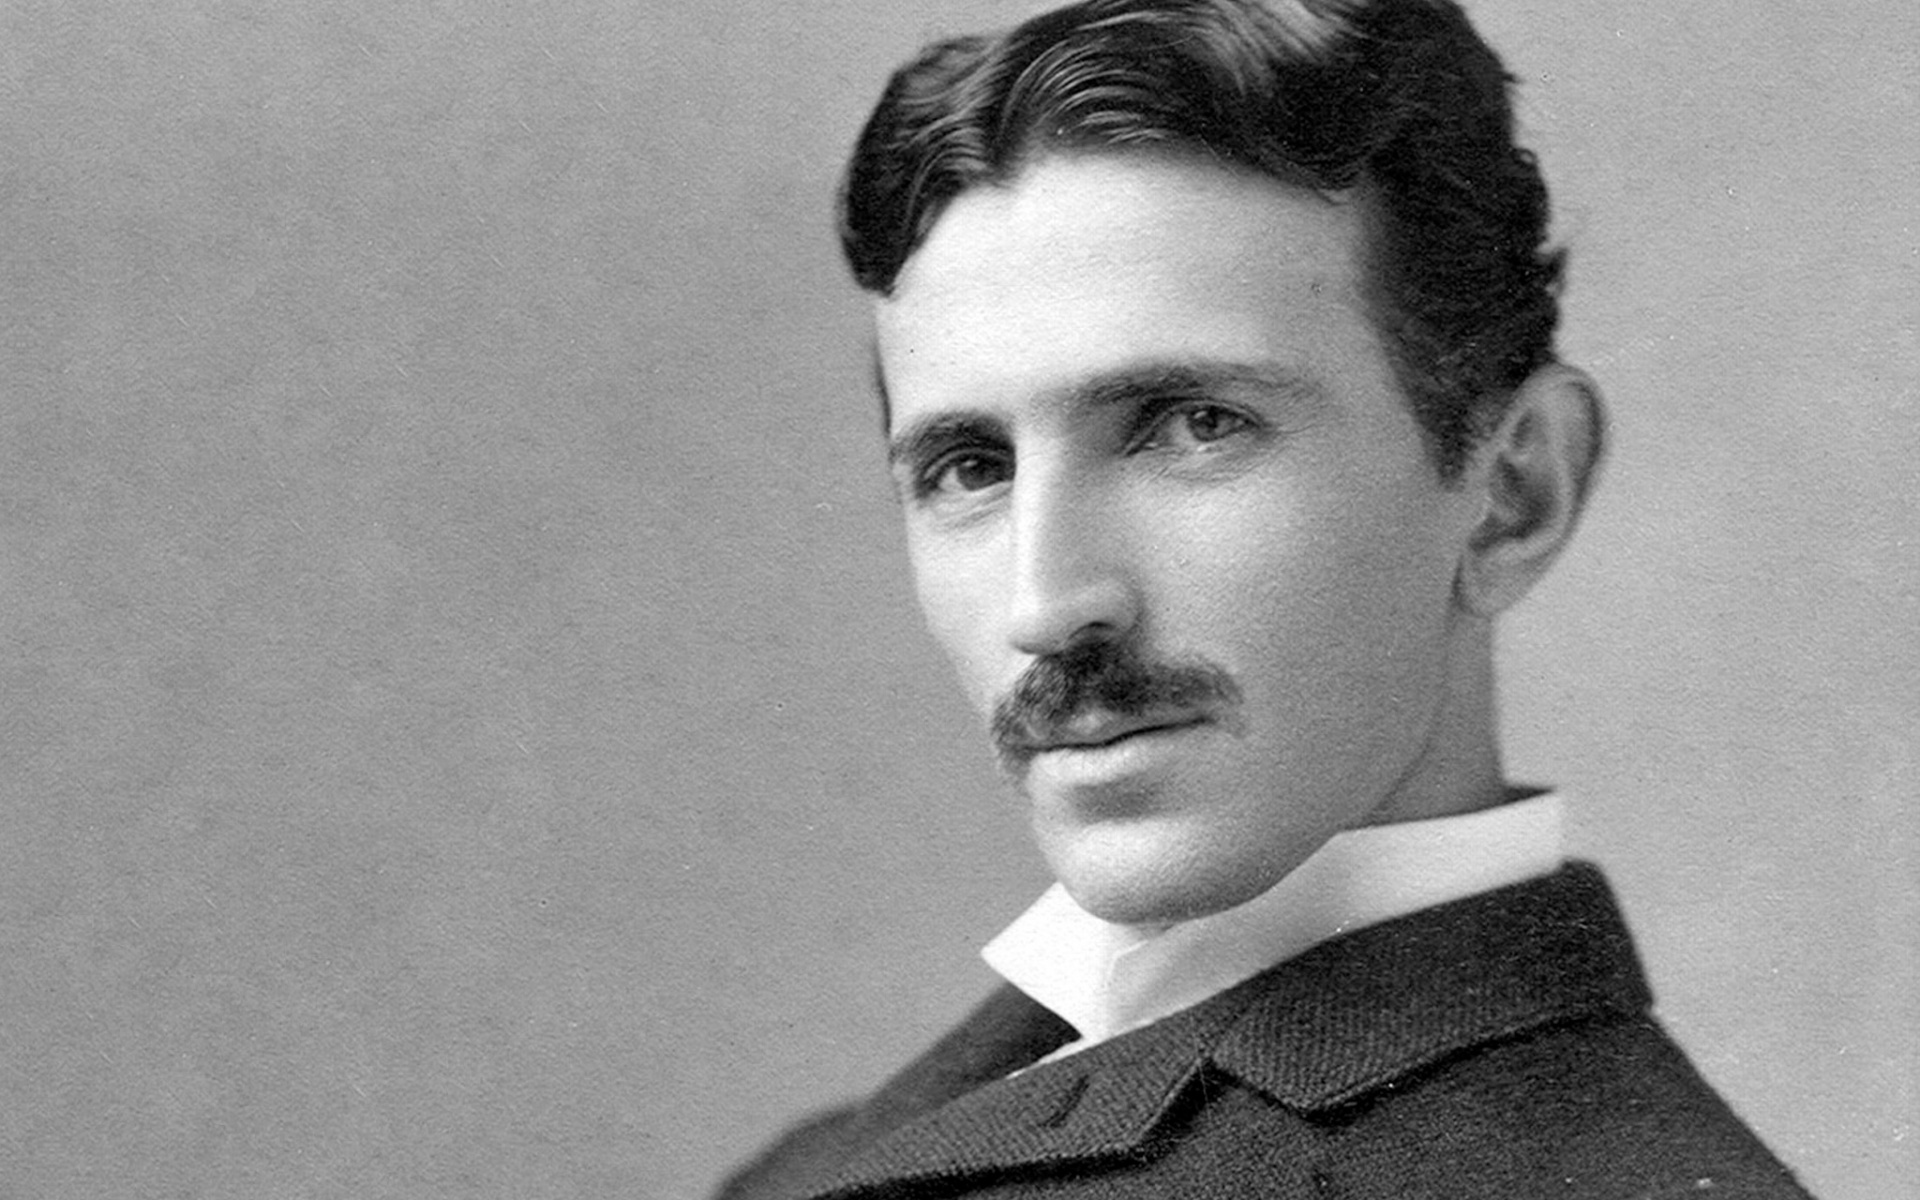 Nikola Tesla was a genius in his own right as he was an inventor, physicist, and mechanical engineer.
He came up with the idea of a mobile phone back in 1901. He also predicted the development of drone warfare. He believed his invention would be so destructive it would "tend to bring about and maintain permanent peace among nations."